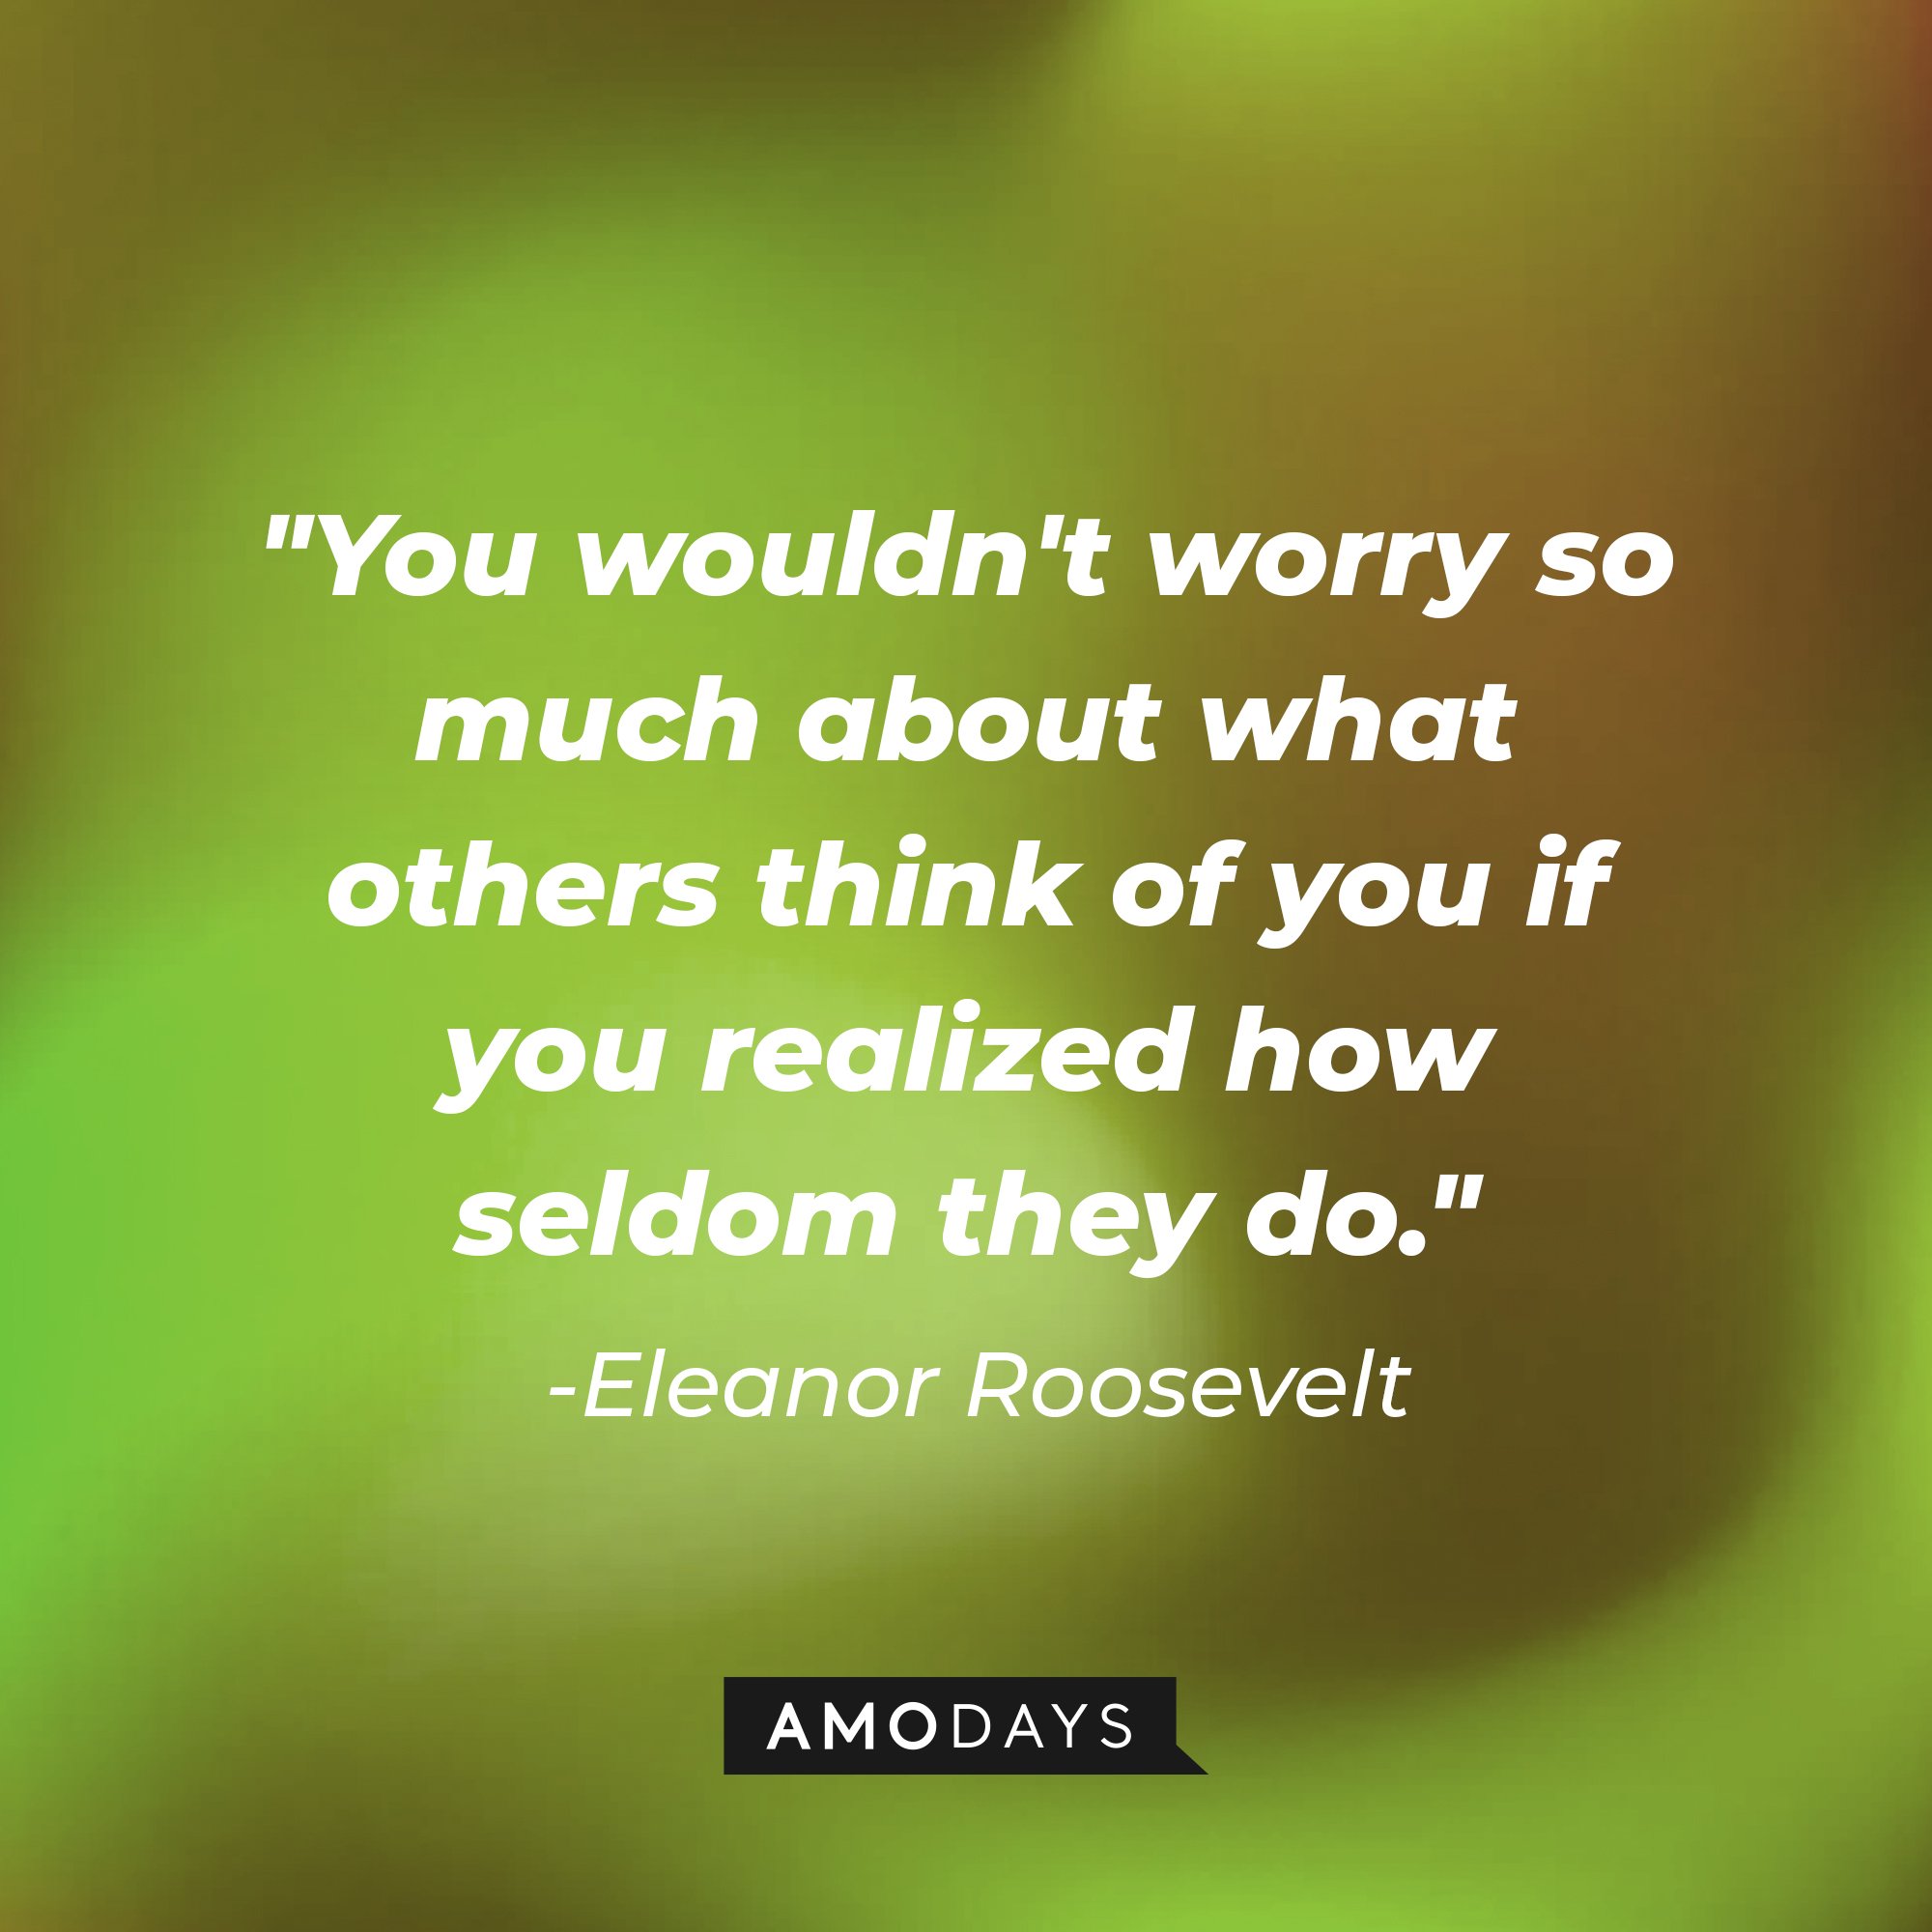 Eleanor Roosevelt's quote: "You wouldn't worry so much about what others think of you if you realized how seldom they do." | Image: AmoDays